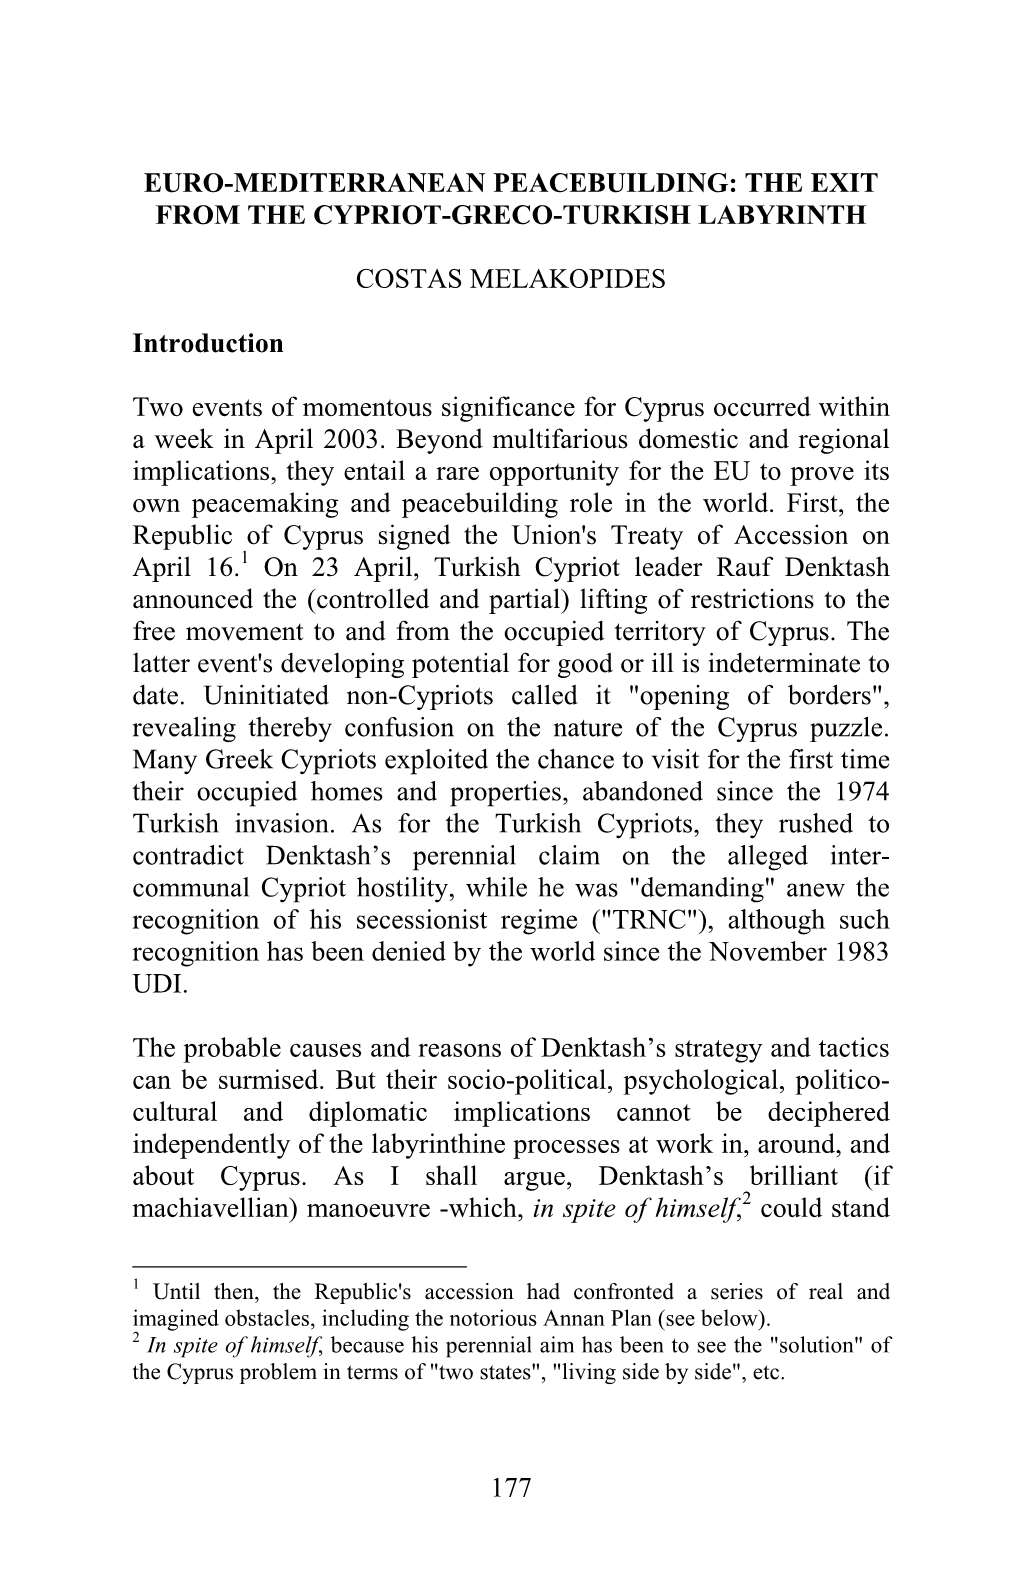 Euro-Mediterranean Peacebuilding: the Exit from the Cypriot-Greco-Turkish Labyrinth